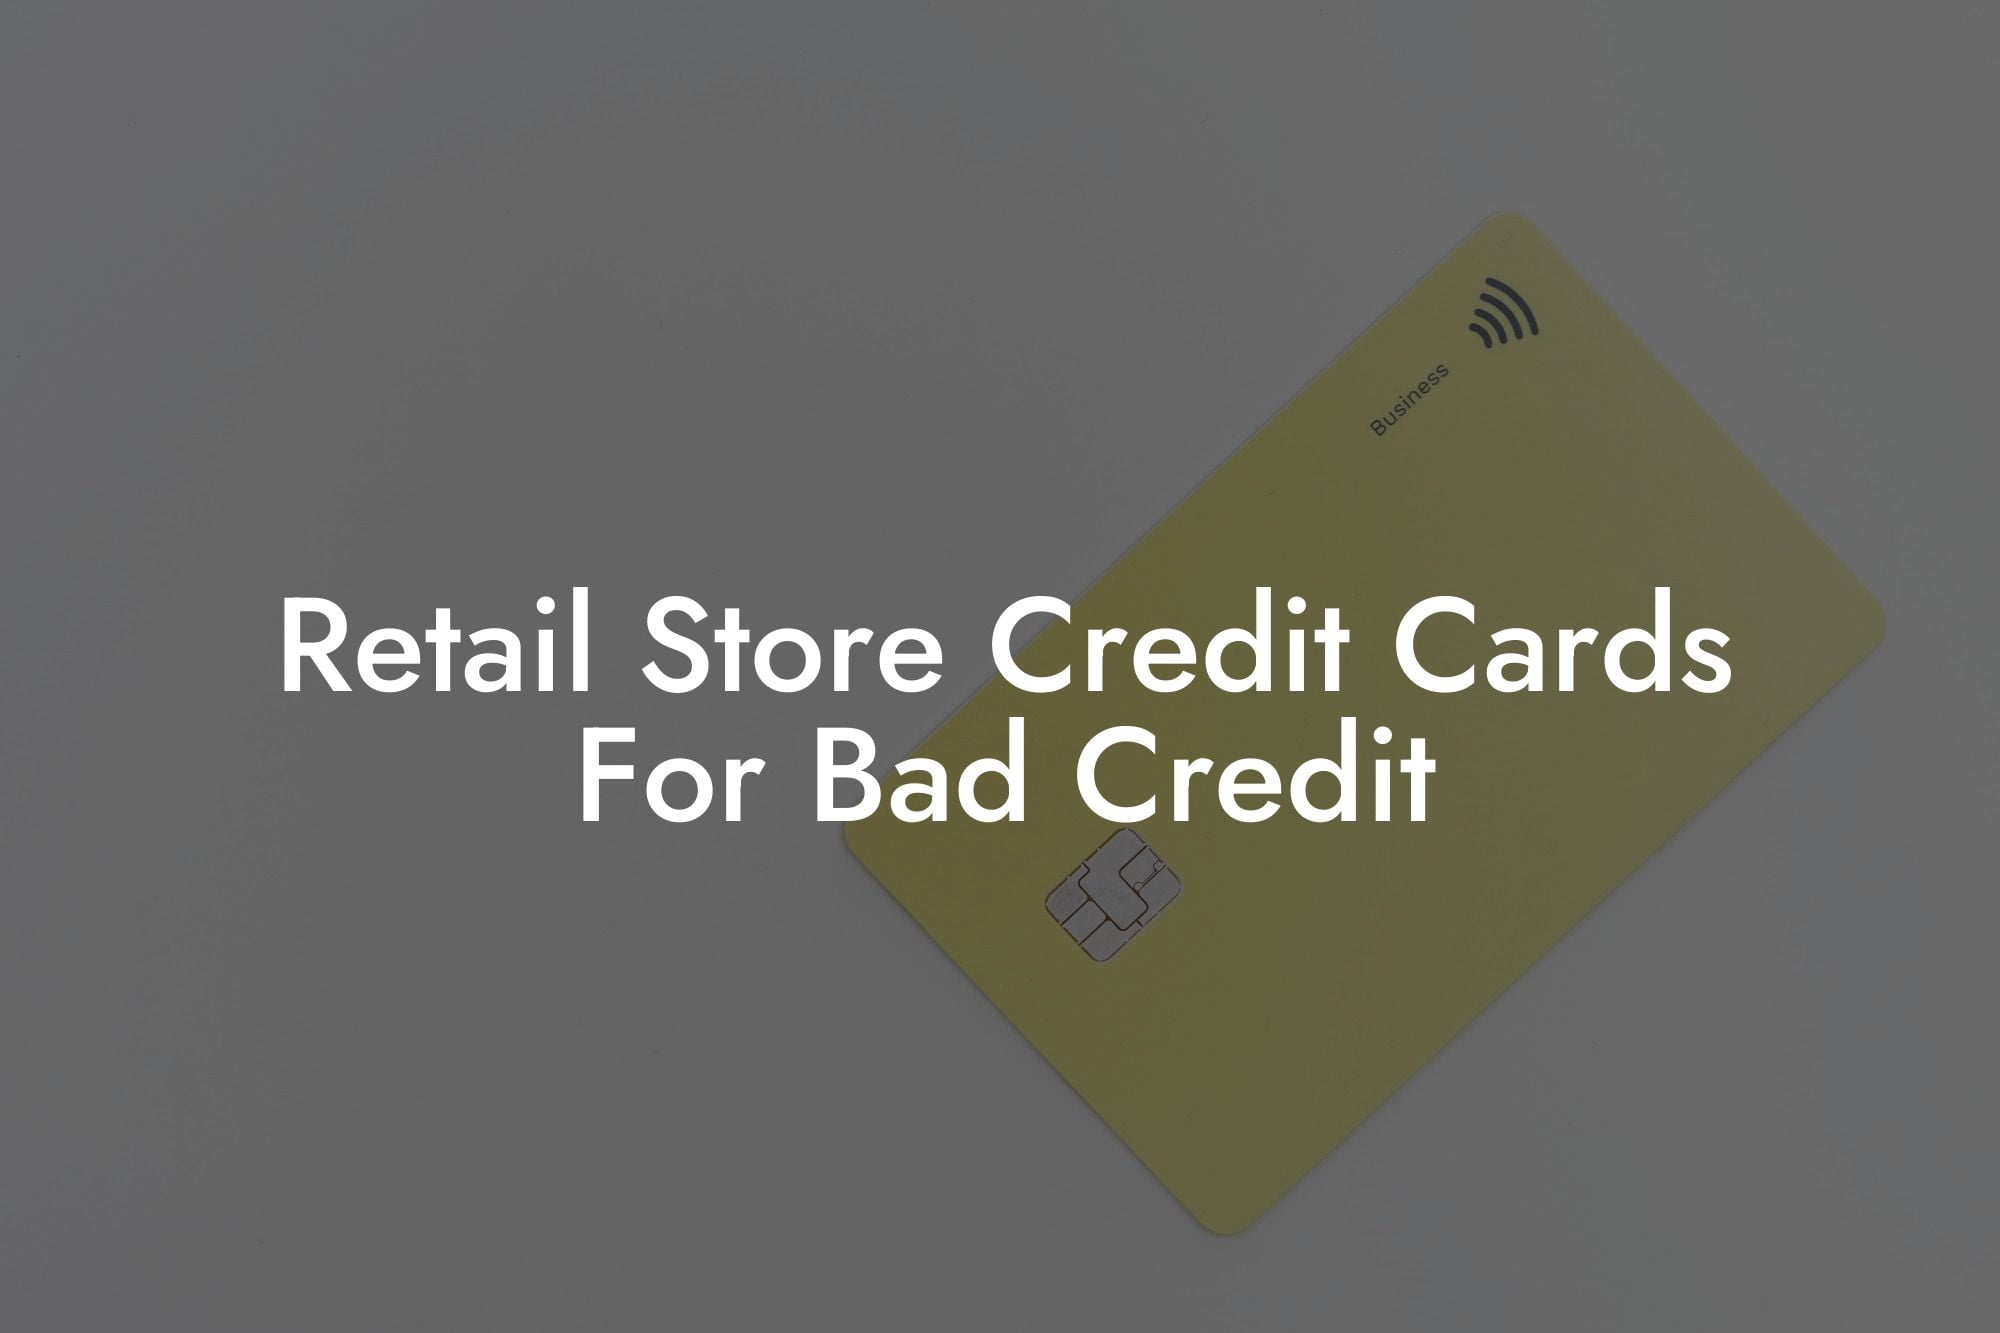 Retail Store Credit Cards For Bad Credit